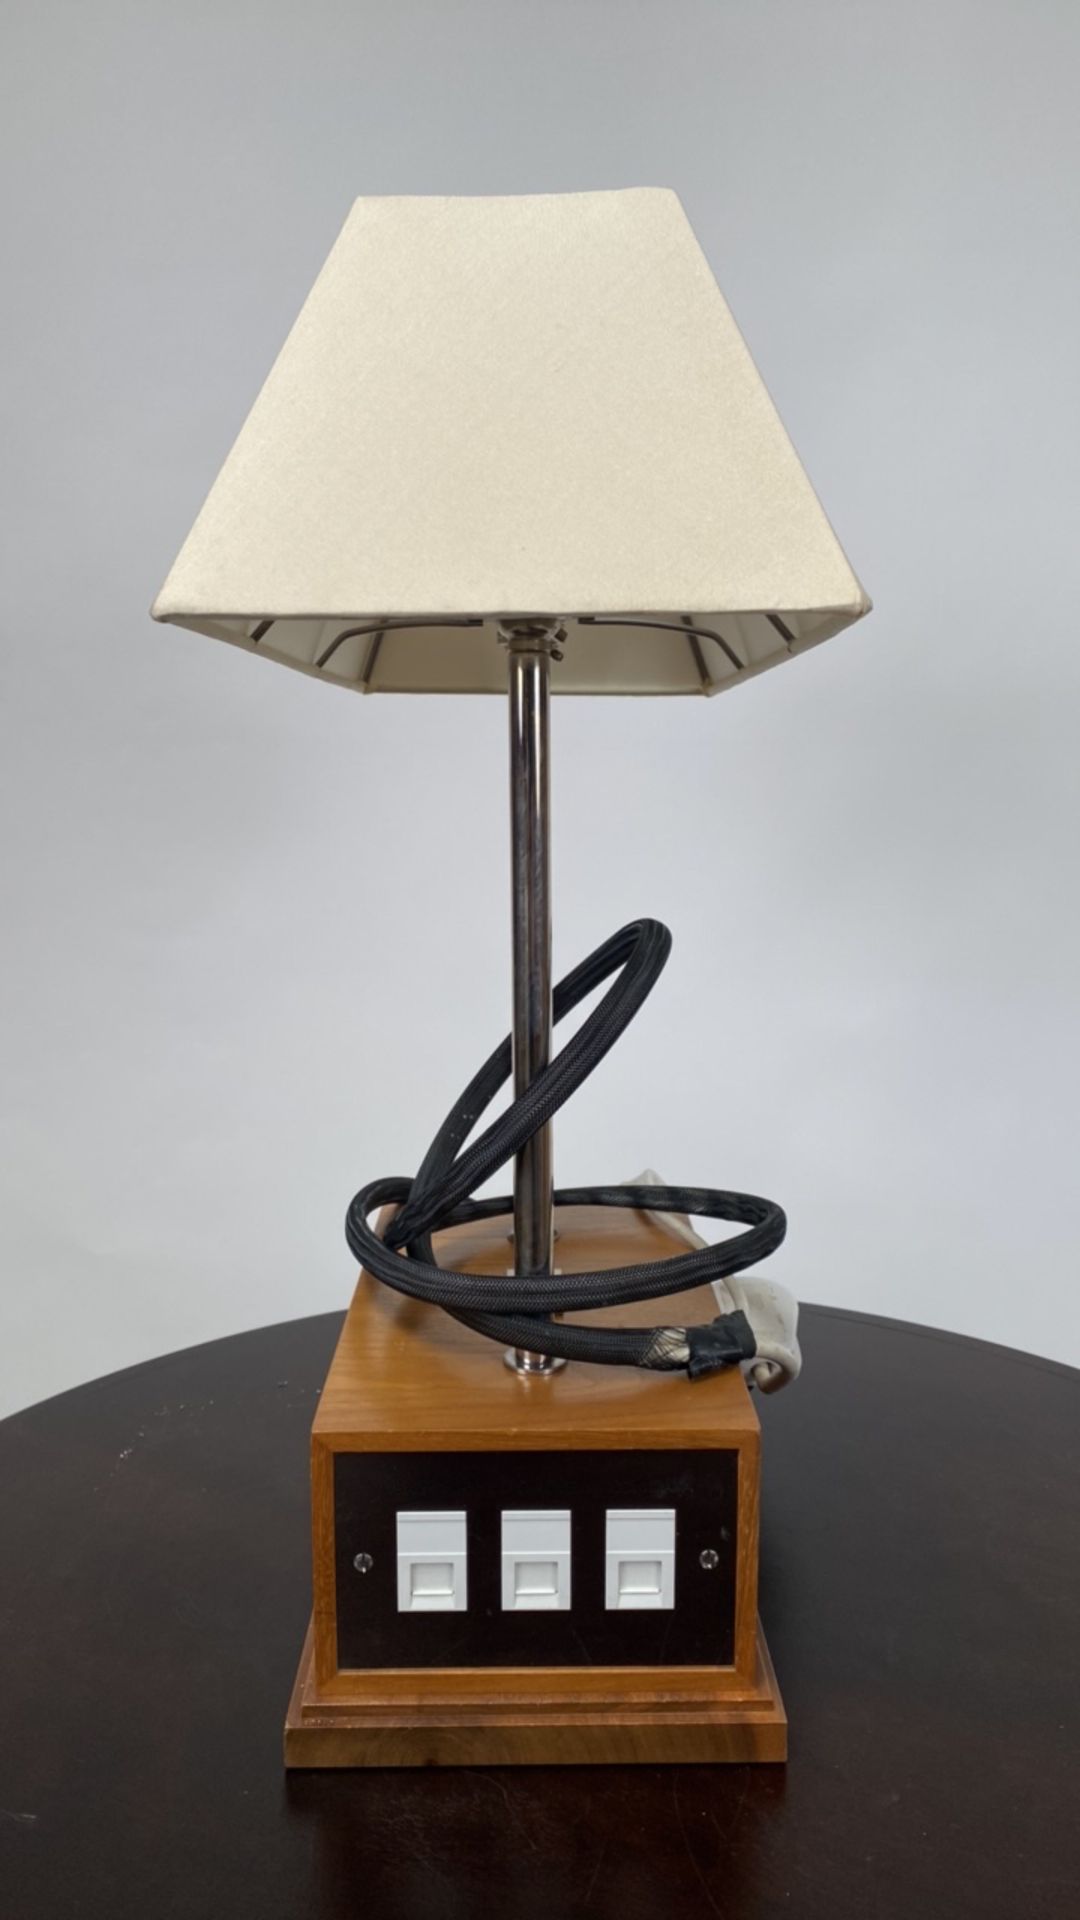 Pair of Contemporary Table Lamps - Image 3 of 4